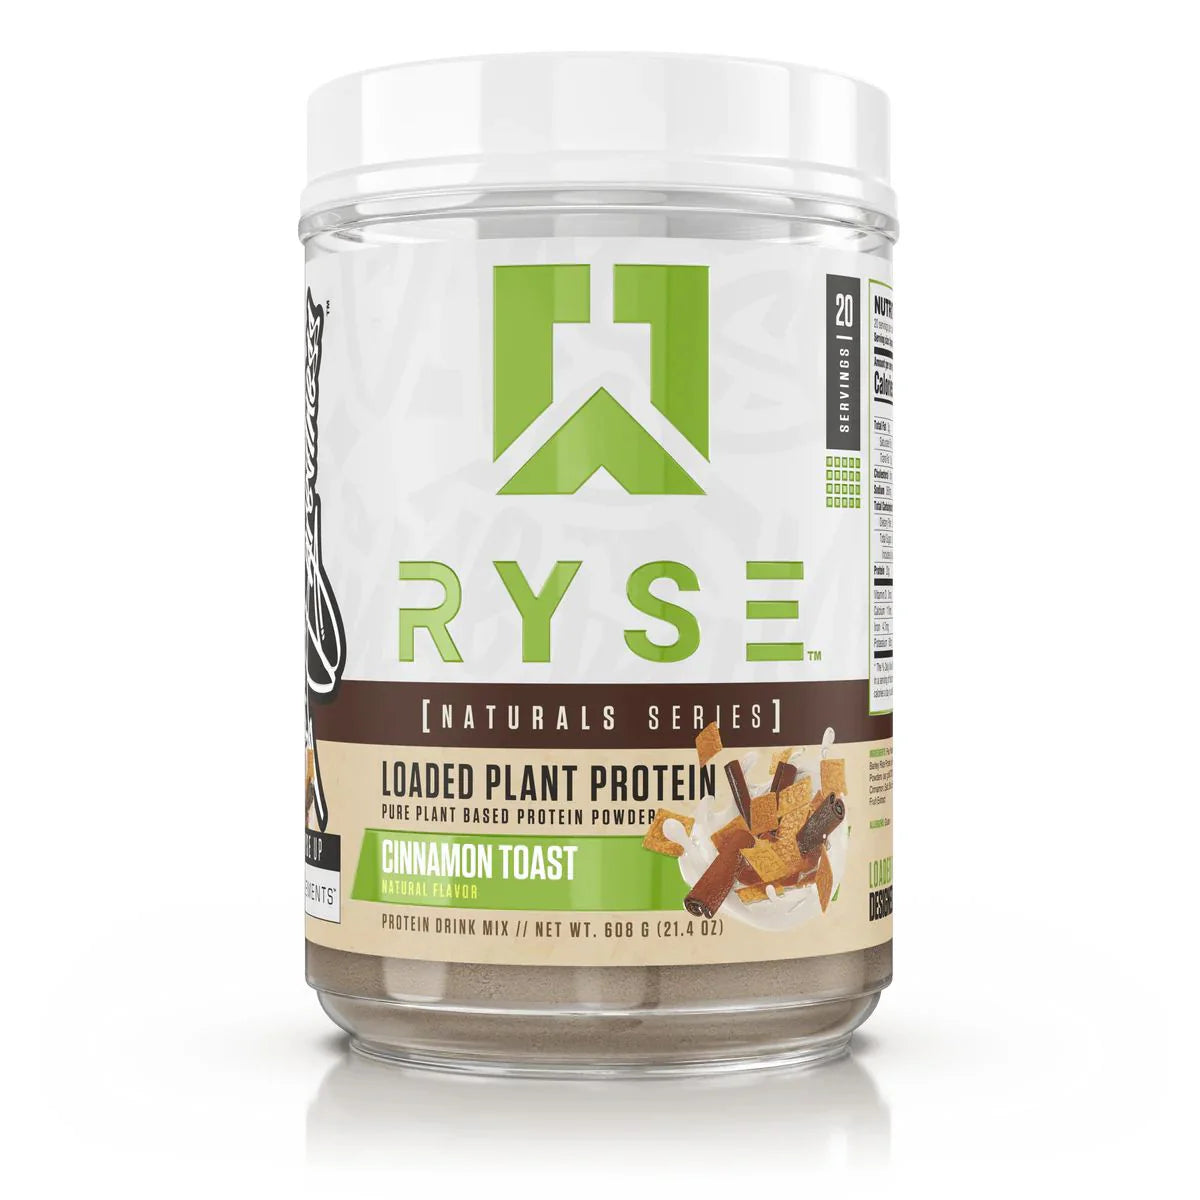 Loaded Plant Protein - Natural Series